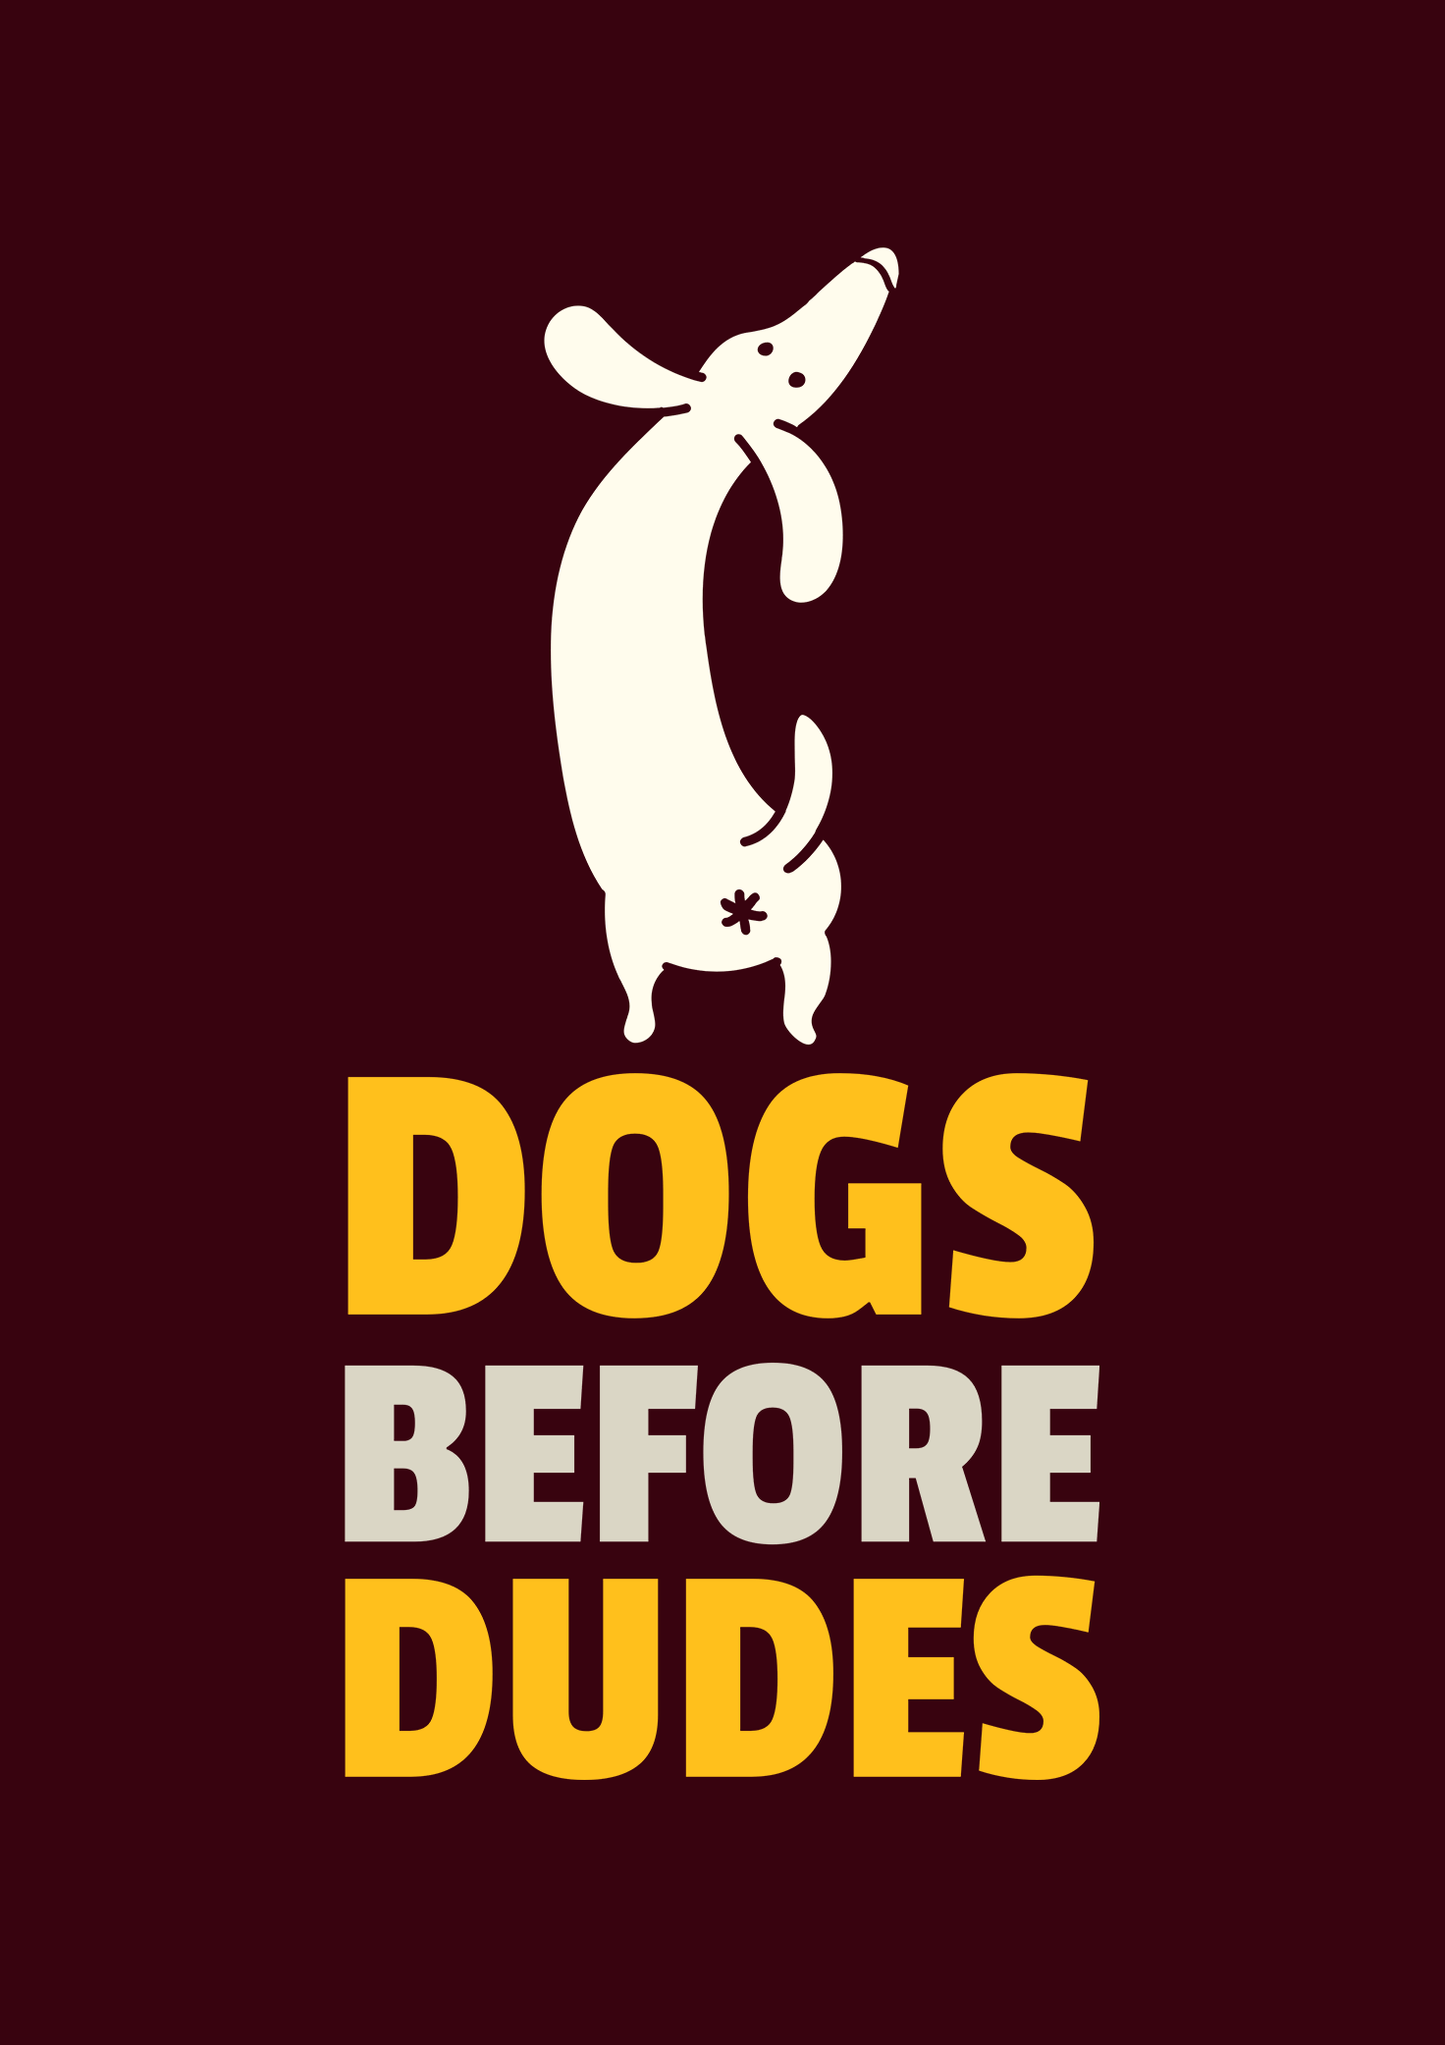 "DOGS BEFORE DUDES " - HALF-SLEEVE T-SHIRTS